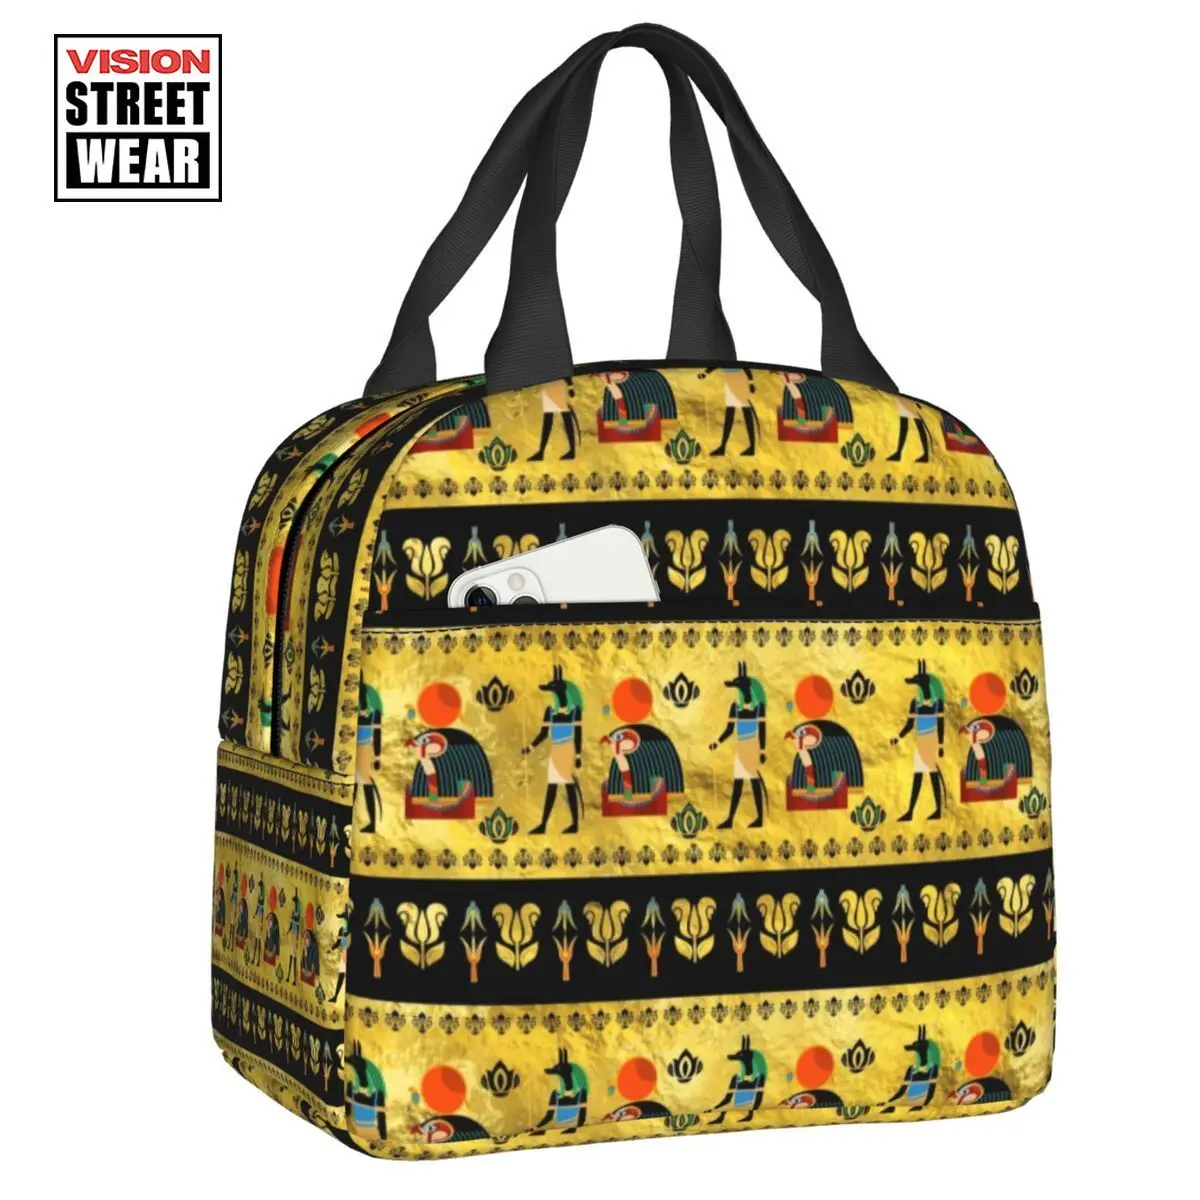 

Egyptian Symbols Pharaoh Gold Insulated Lunch Bags For Ancient Egypt Culture Cooler Thermal Bento Box Work School Travel